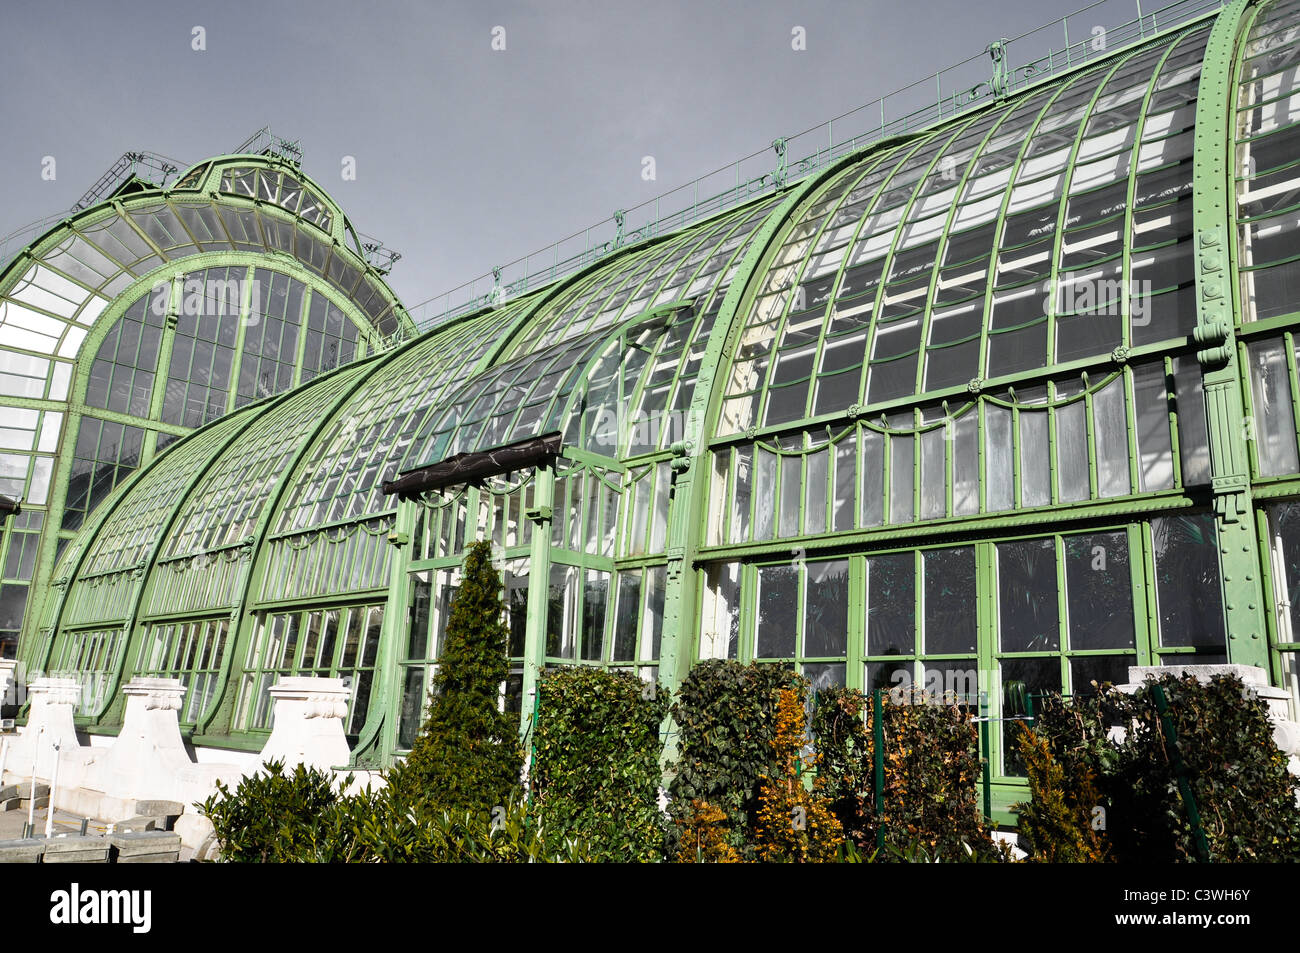 an antique greenhouse with aged steel under a grey overcast sky Stock Photo